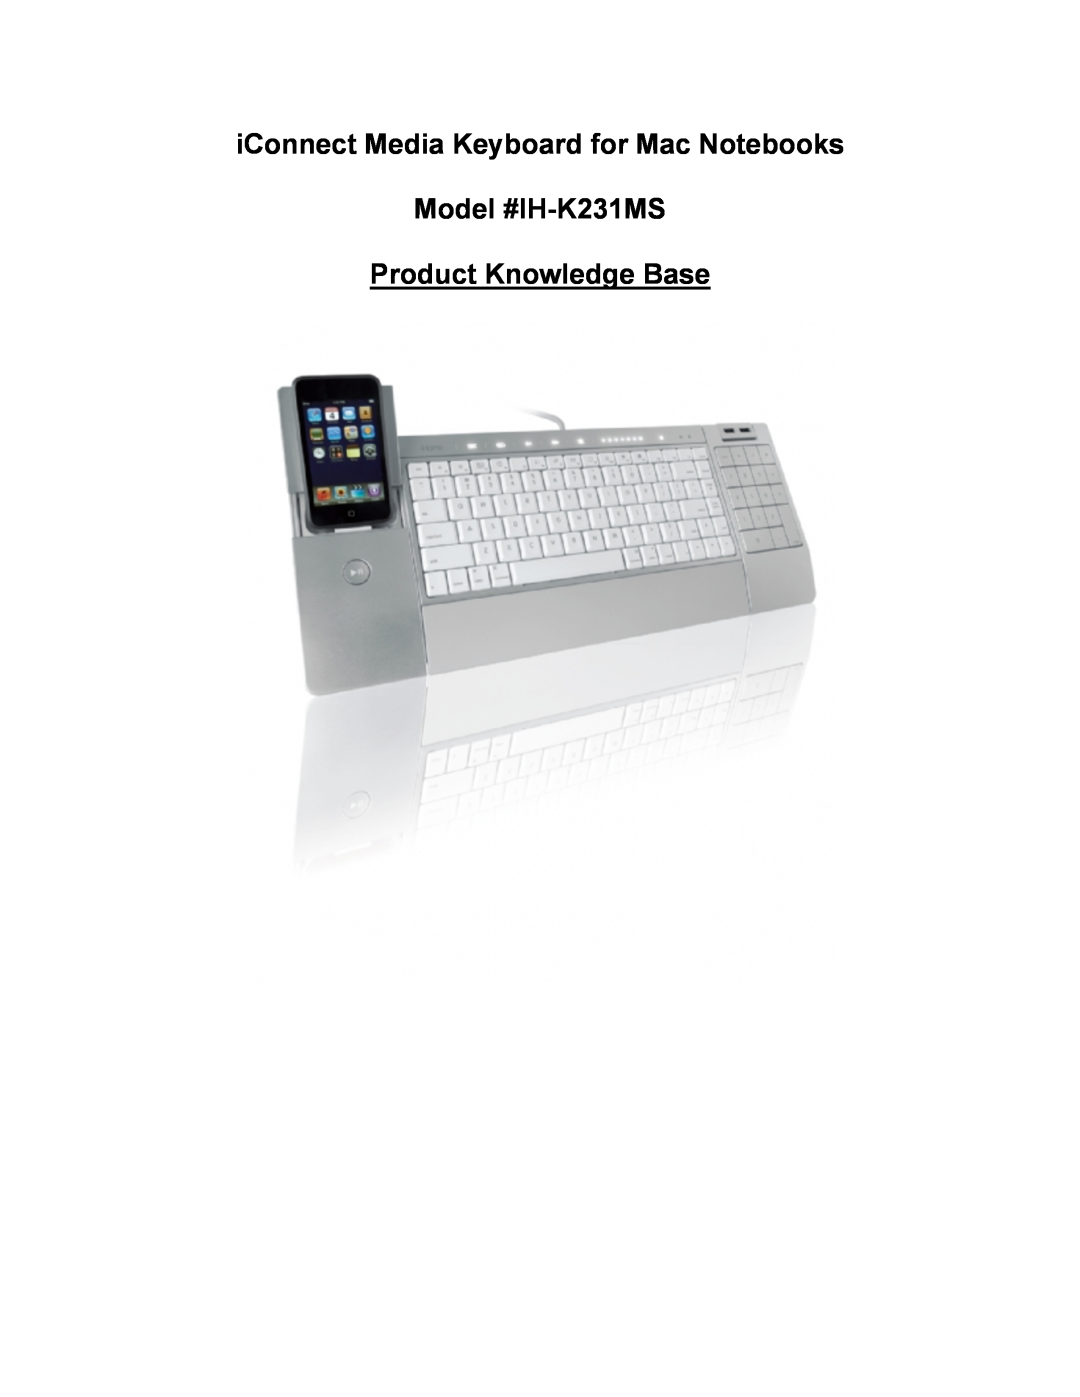 iHome manual iConnect Media Keyboard for Mac Notebooks, Model #IH-K231MS Product Knowledge Base 